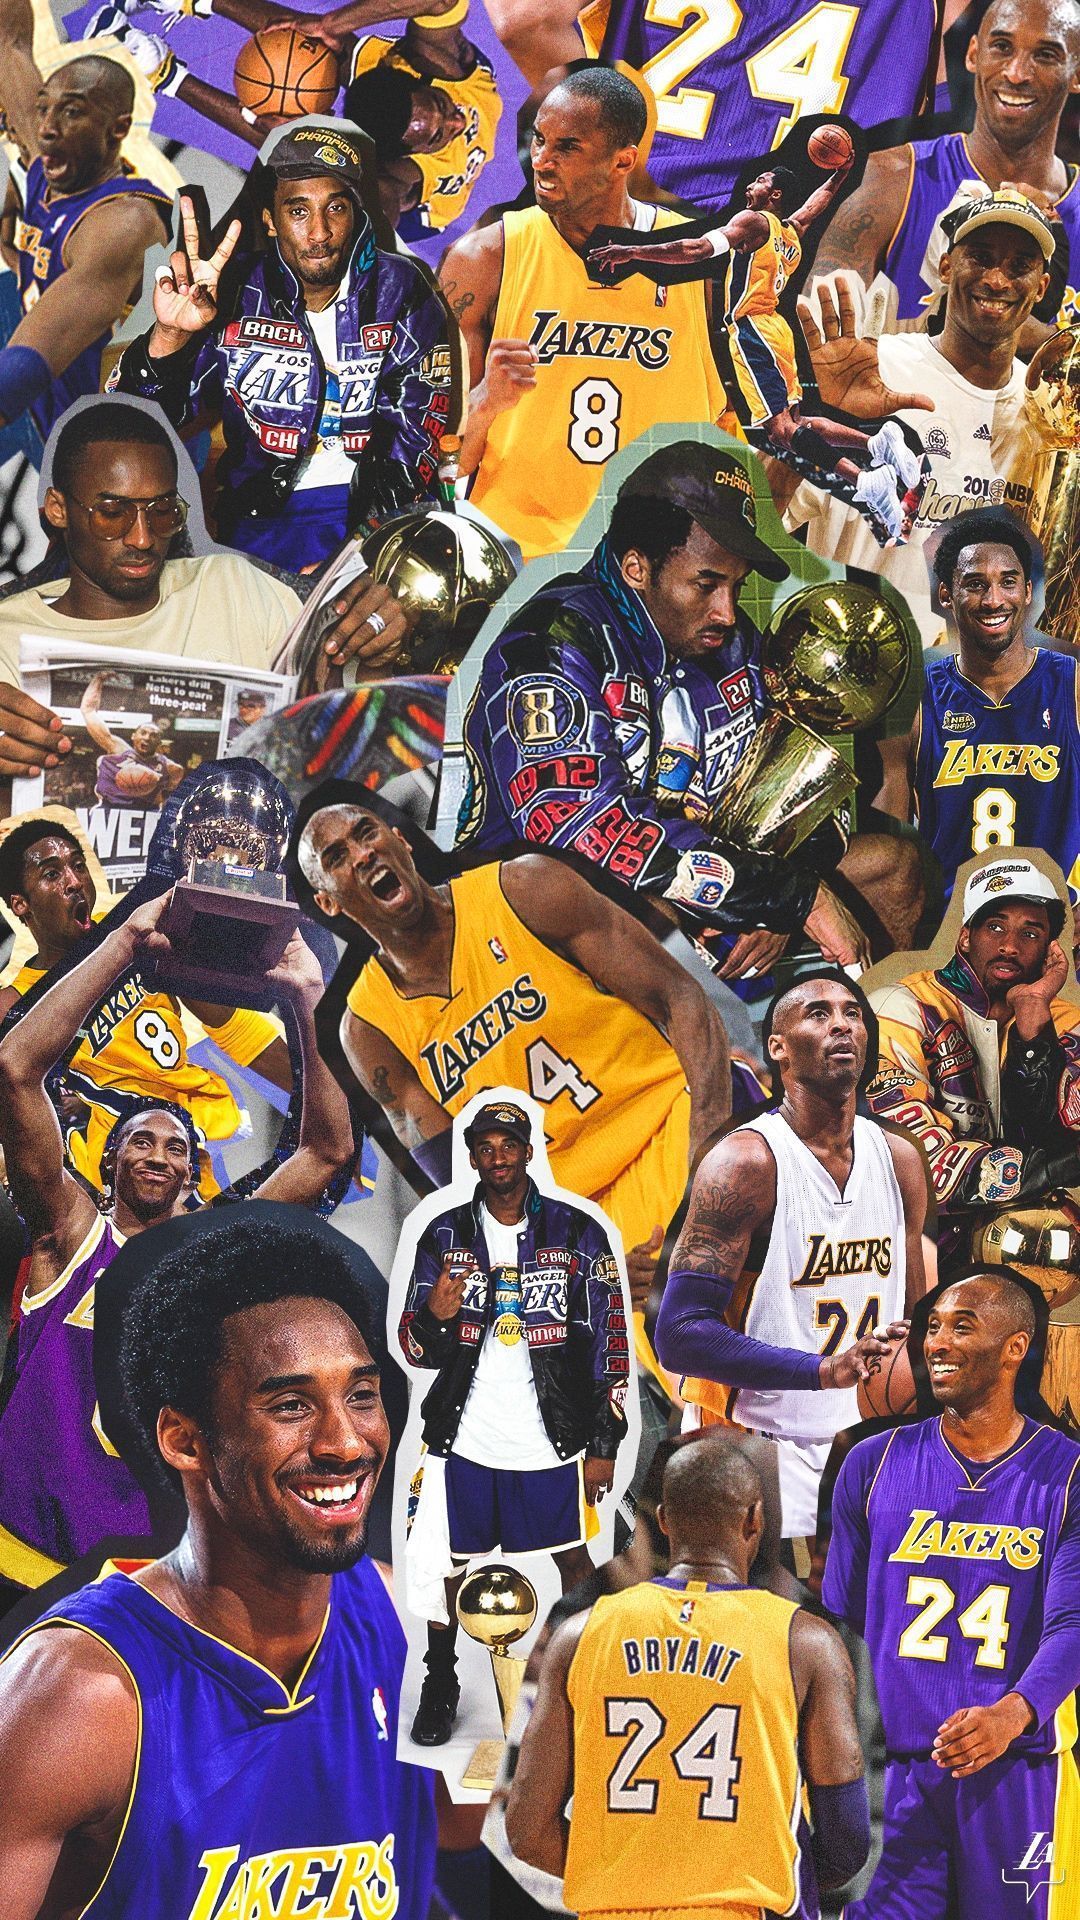 Collage of Kobe Bryant's career with the Lakers. - Los Angeles Lakers, Kobe Bryant